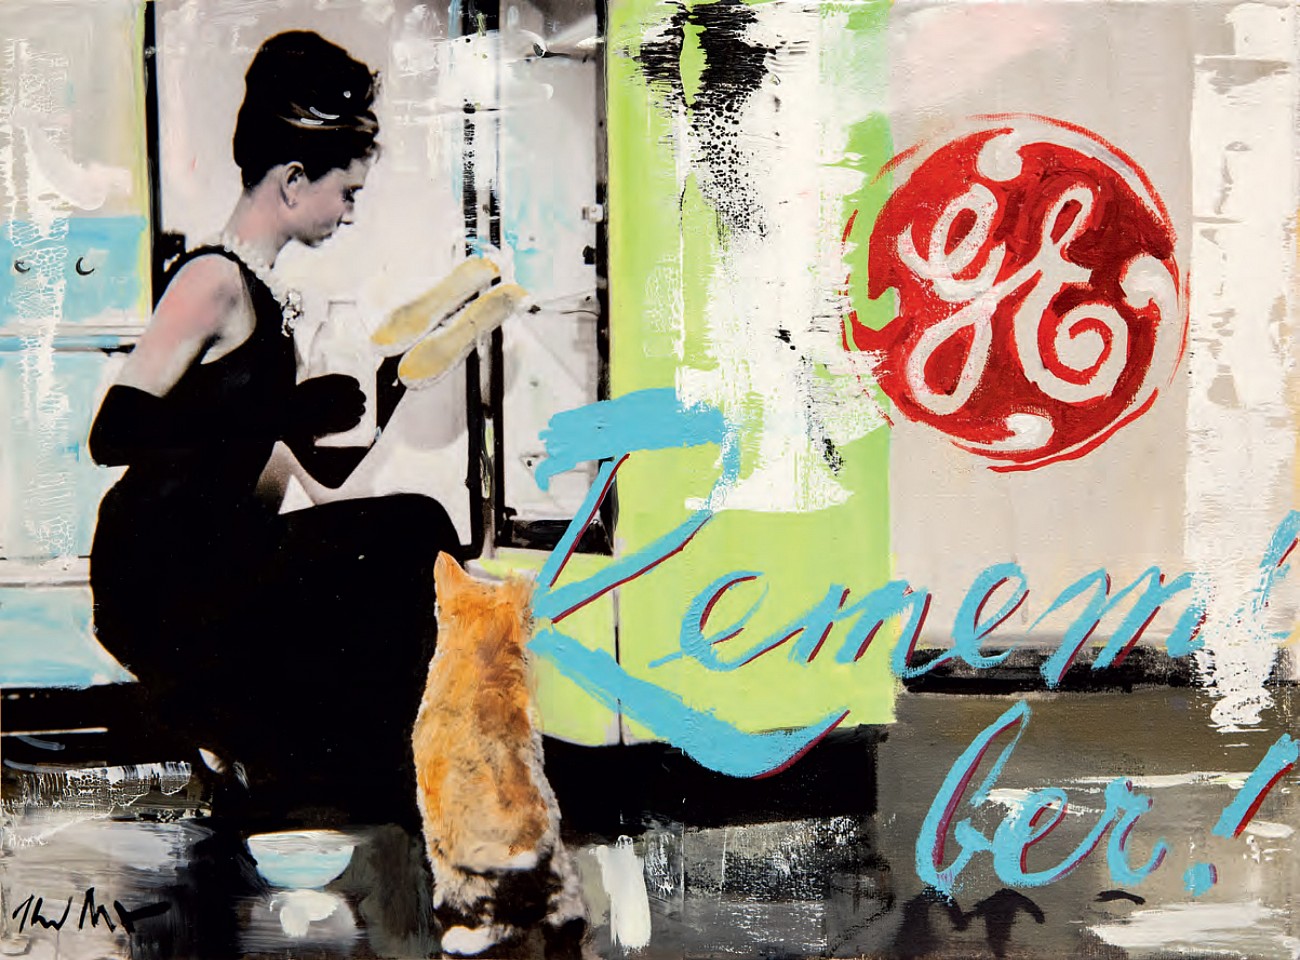 Heiner Meyer, Remember GE, 2013
Oil and photo on canvas, 11 3/4 x 15 3/4 inches
MEYE0023